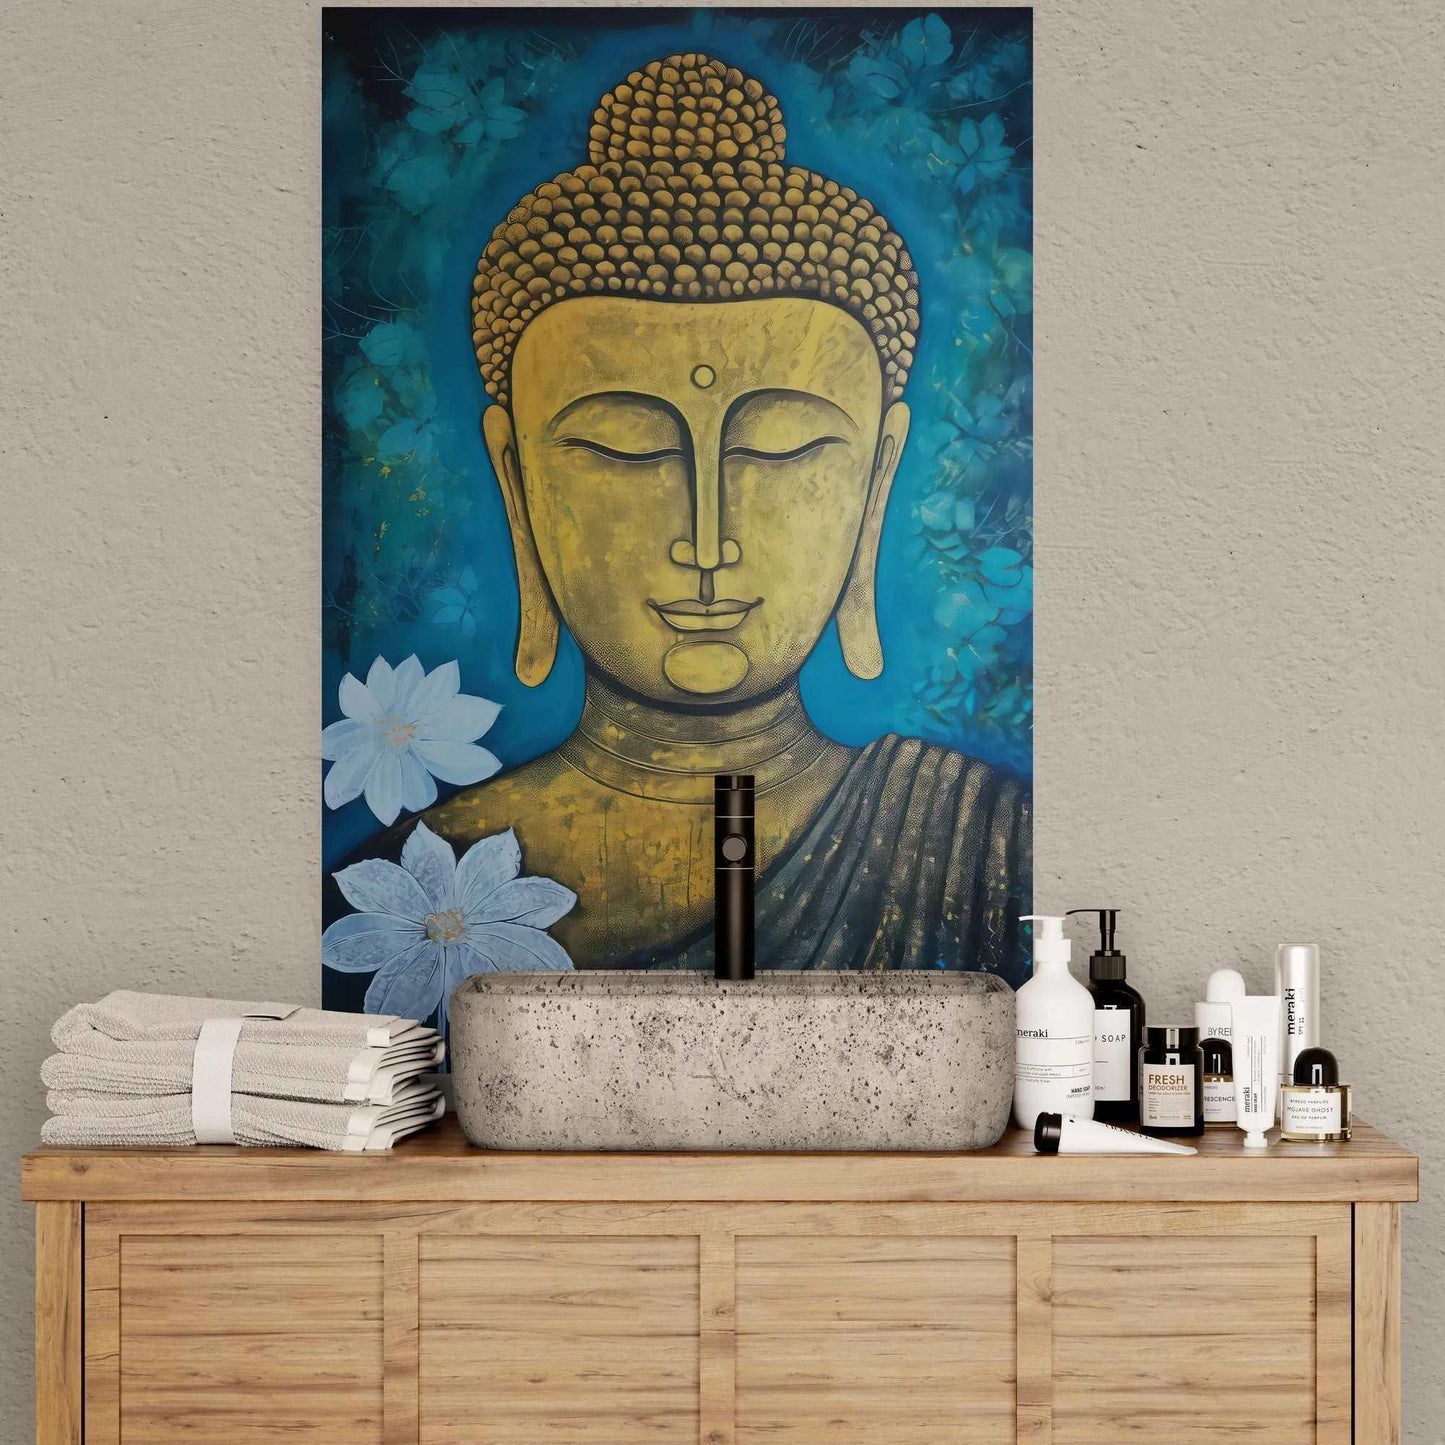 Golden Buddha artwork with blue floral designs, positioned above a bathroom sink with towels and beauty products.